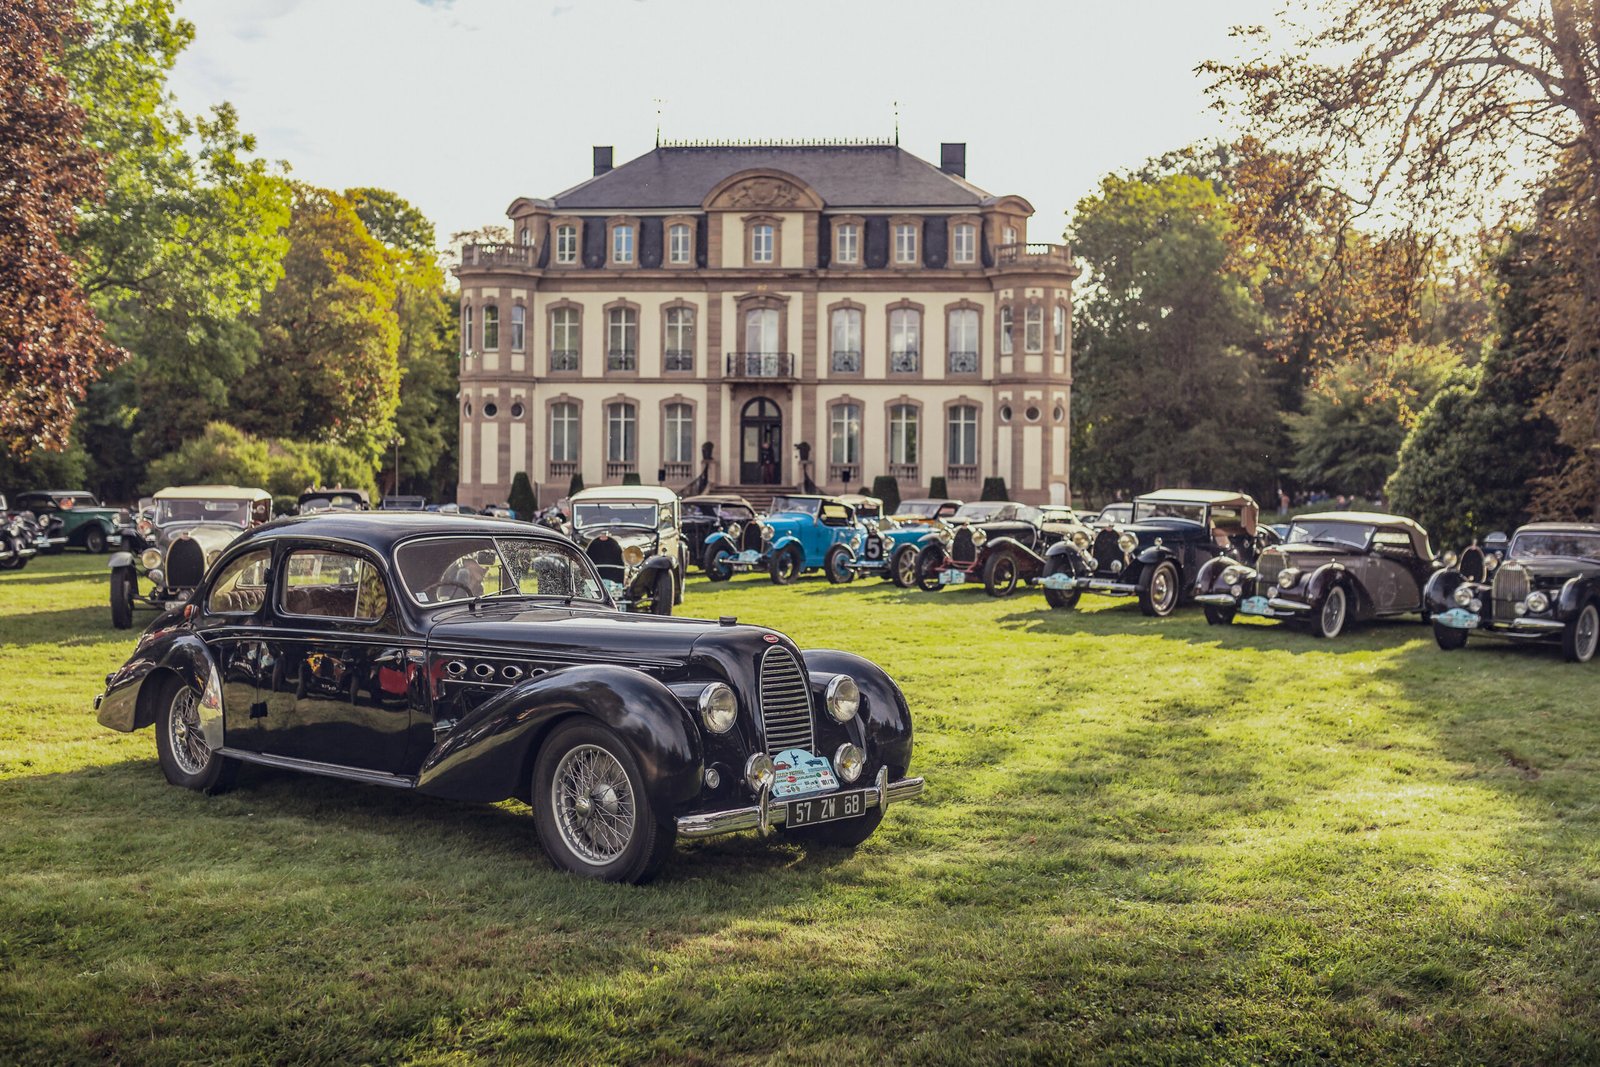 BUGATTI FESTIVAL: HONORING THE BIRTHPLACE OF AN ICONIC BRAND